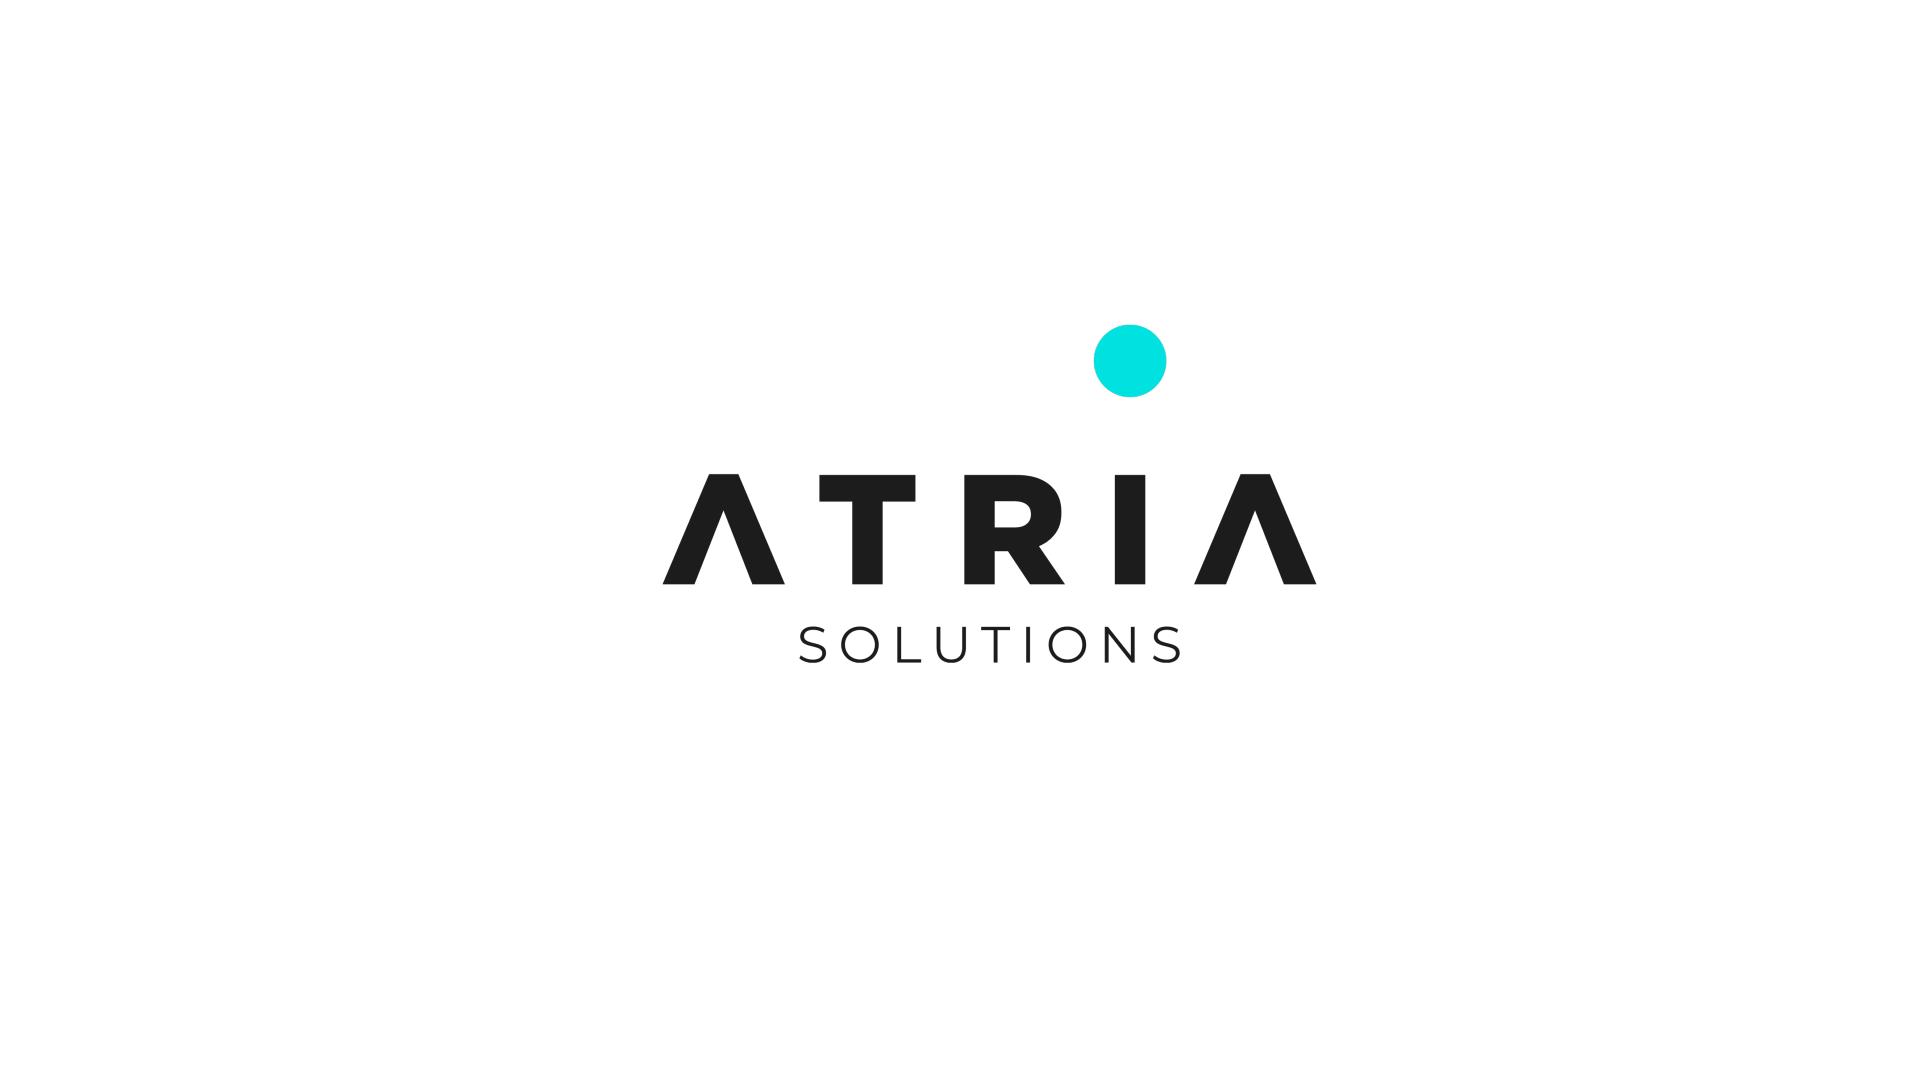 atria solutions lebanon IT consulting cybersecurity cisco security internet of things